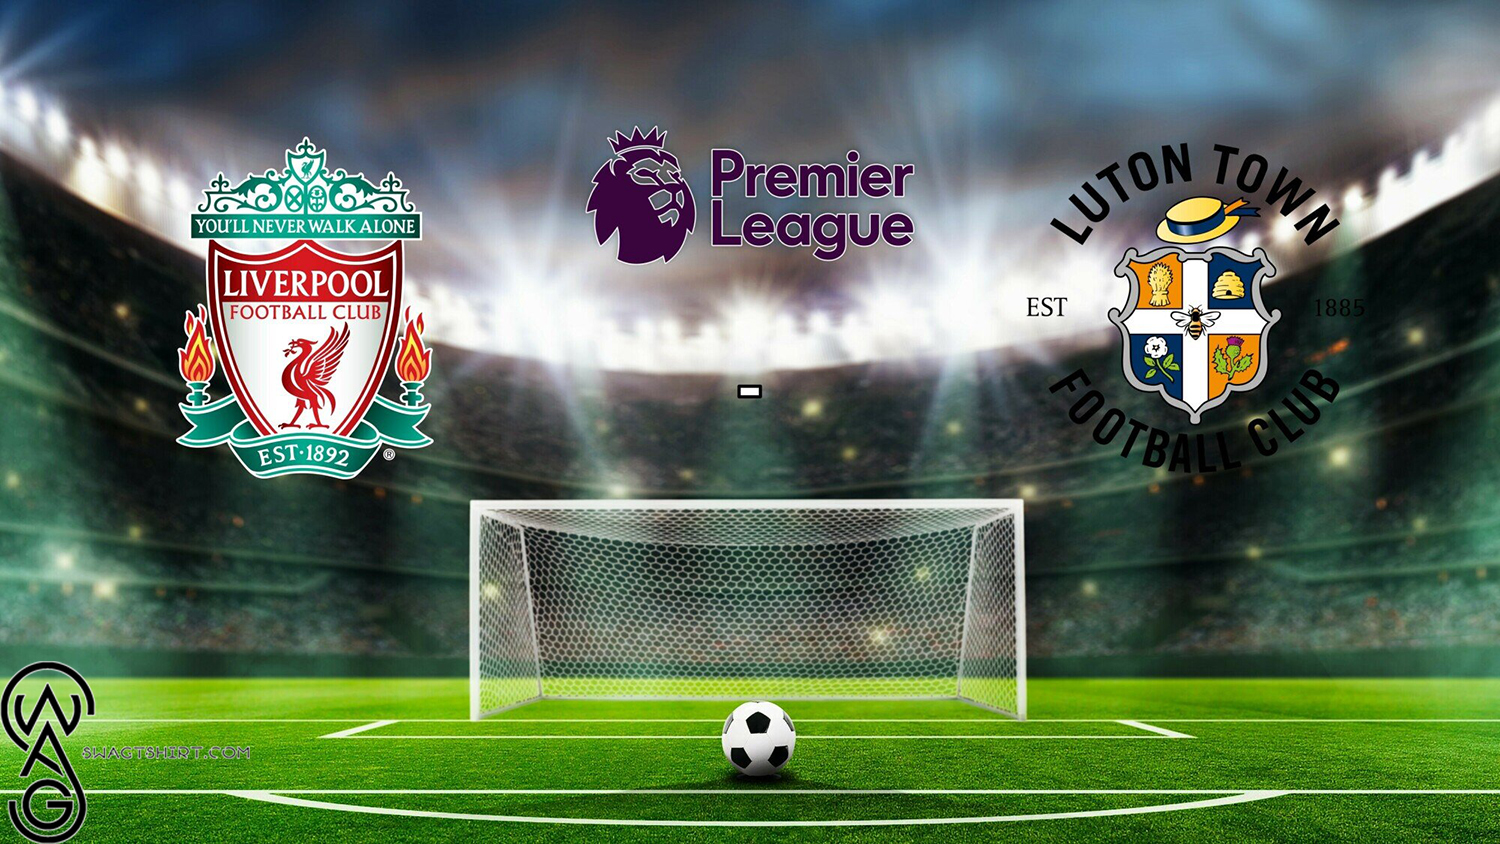 When David Meets Goliath Liverpool vs Luton Town at Anfield's Grand Stage